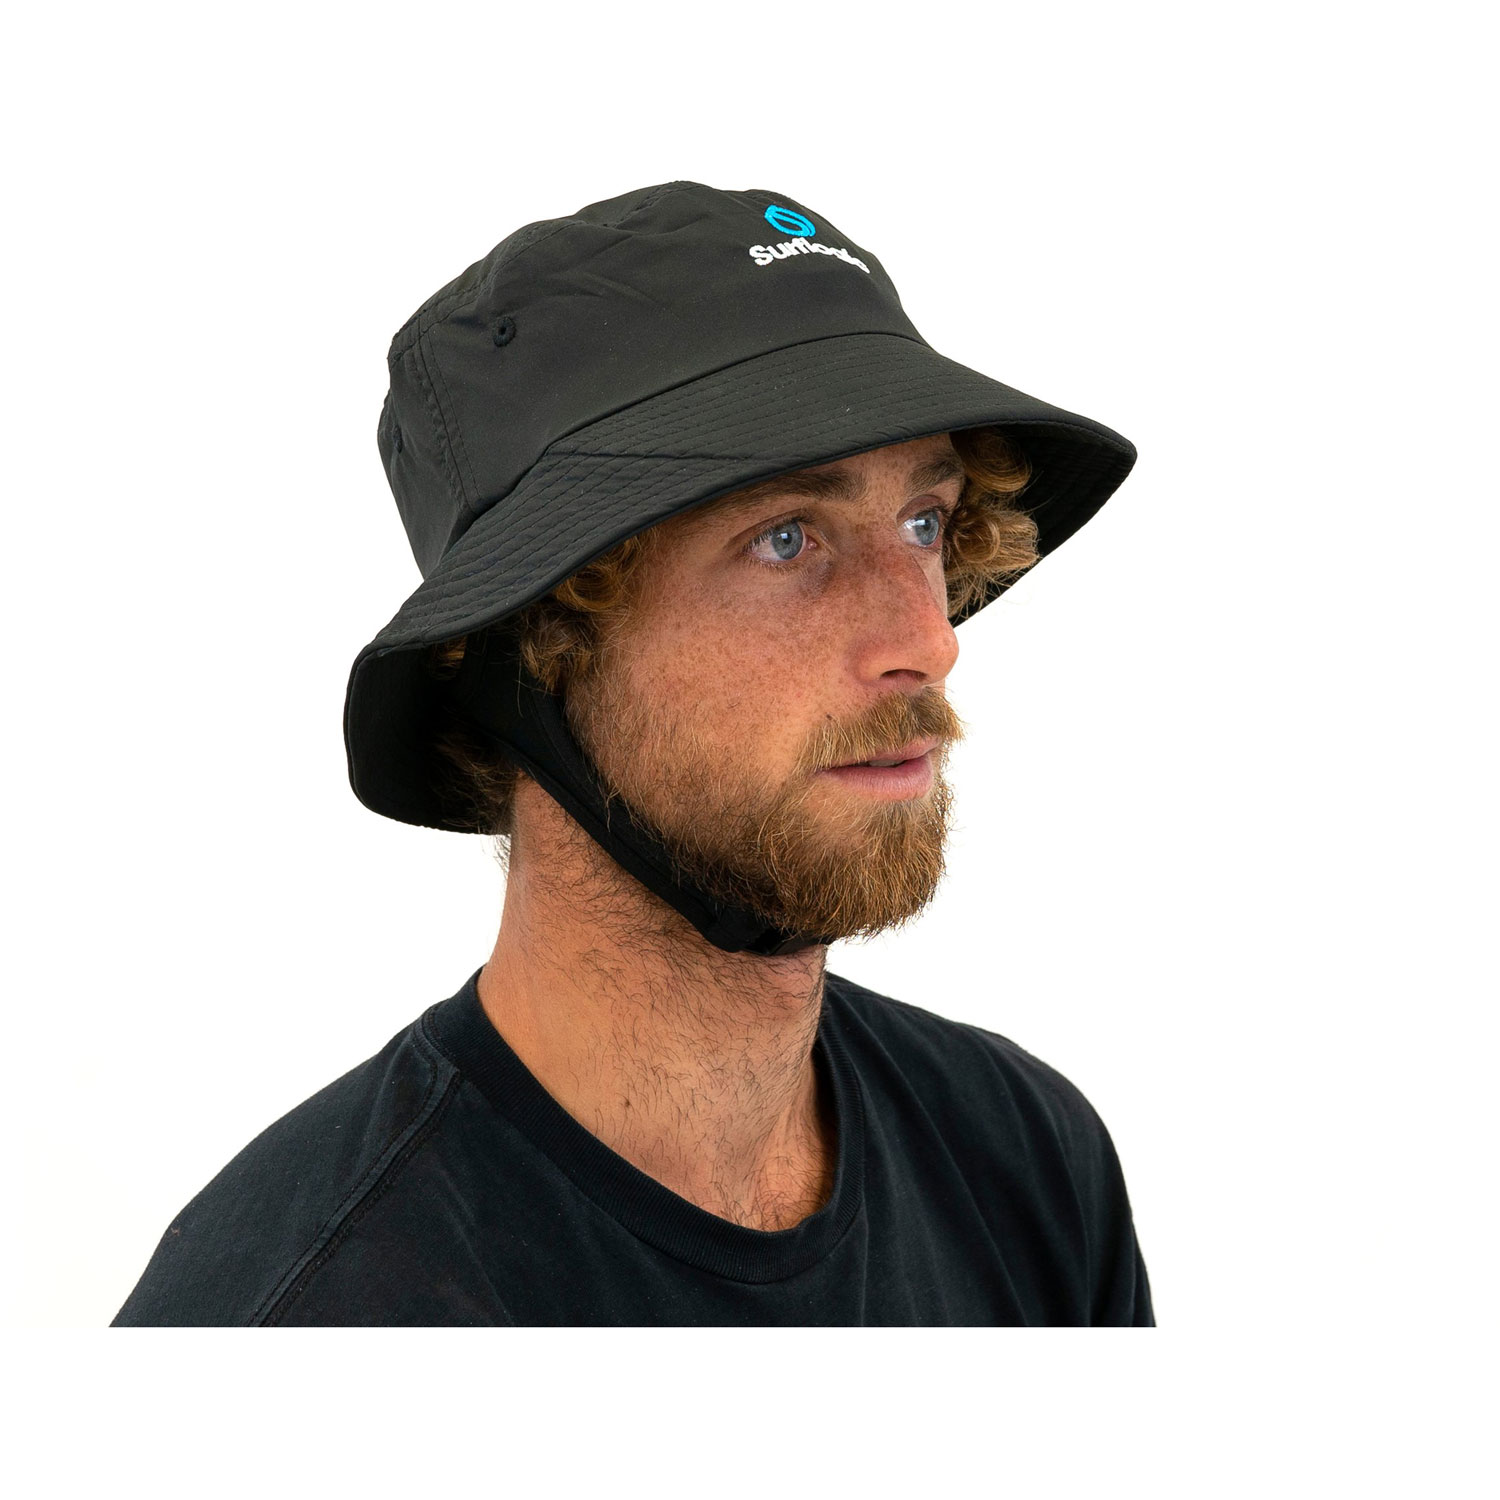 Anroll Surfing Bucket Hats with Securing Chin Strap for Men and Women Surf  Cap Fast Drying Black : Buy Online at Best Price in KSA - Souq is now  : Fashion